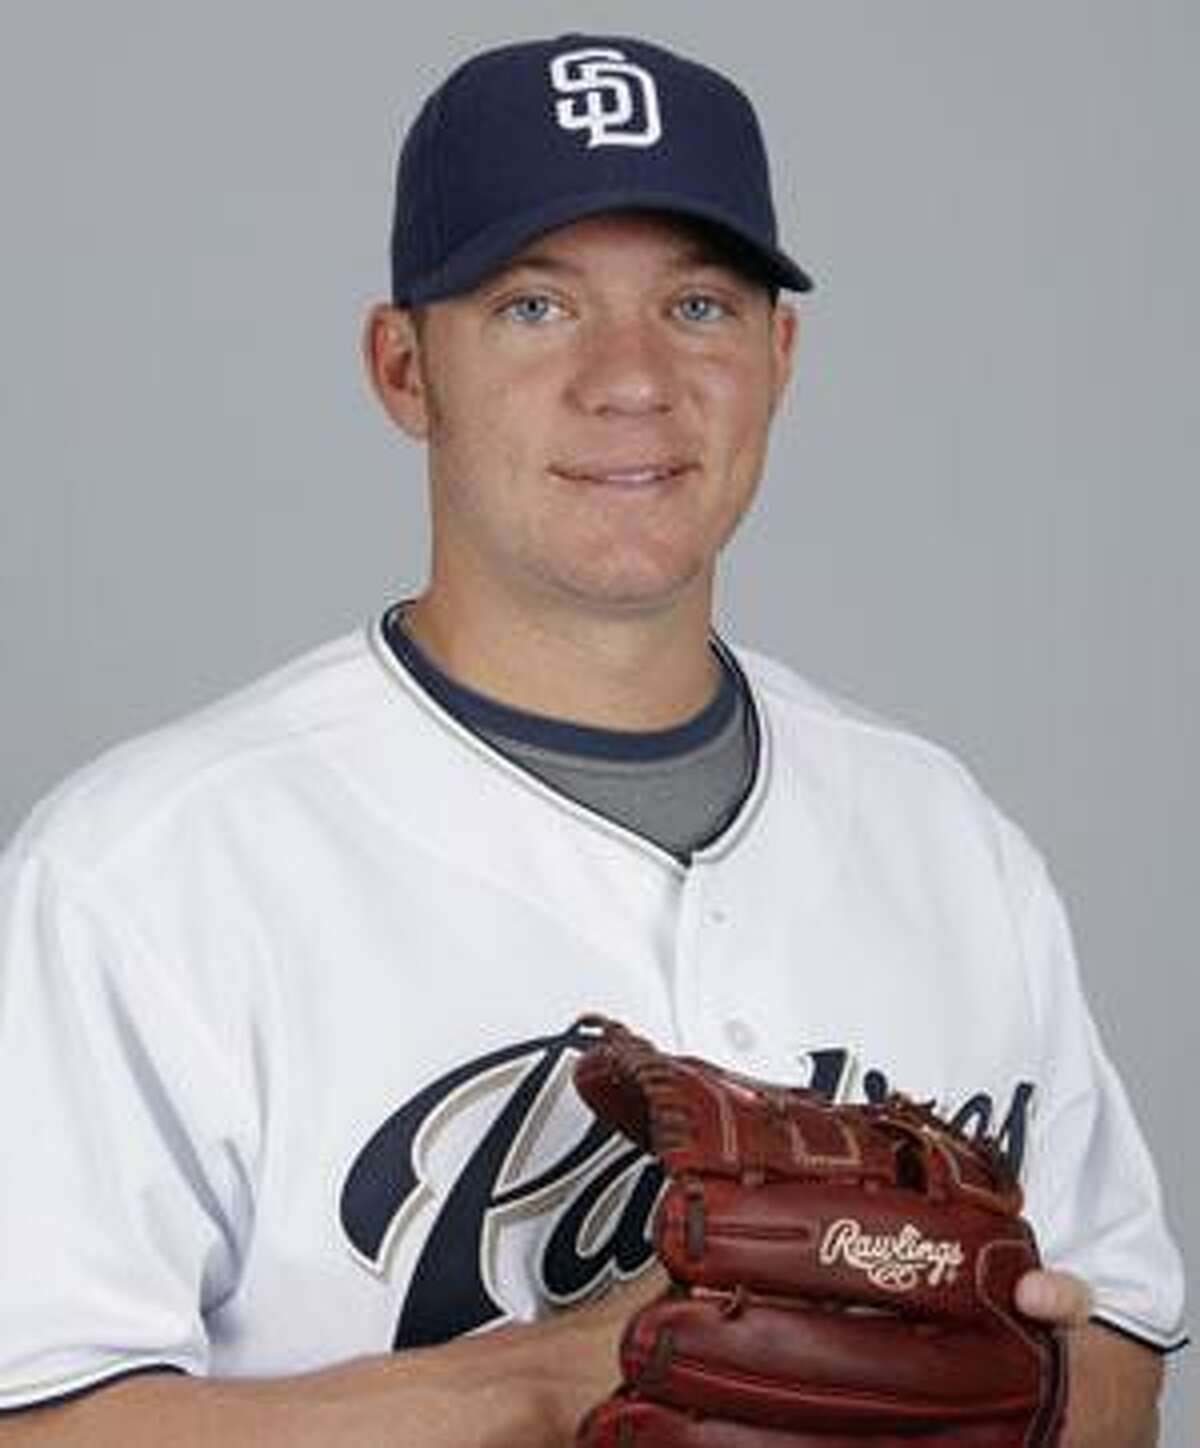 In this Feb. 24, 2009, file photo, San Diego Padres pitcher Jake Peavy poses for a photo in Peoria, Ariz. The Padres traded Peavy to the Chicago White Sox on Friday shortly before the deadline for making deals without waivers. (AP Photo/Charlie Riedel,file)